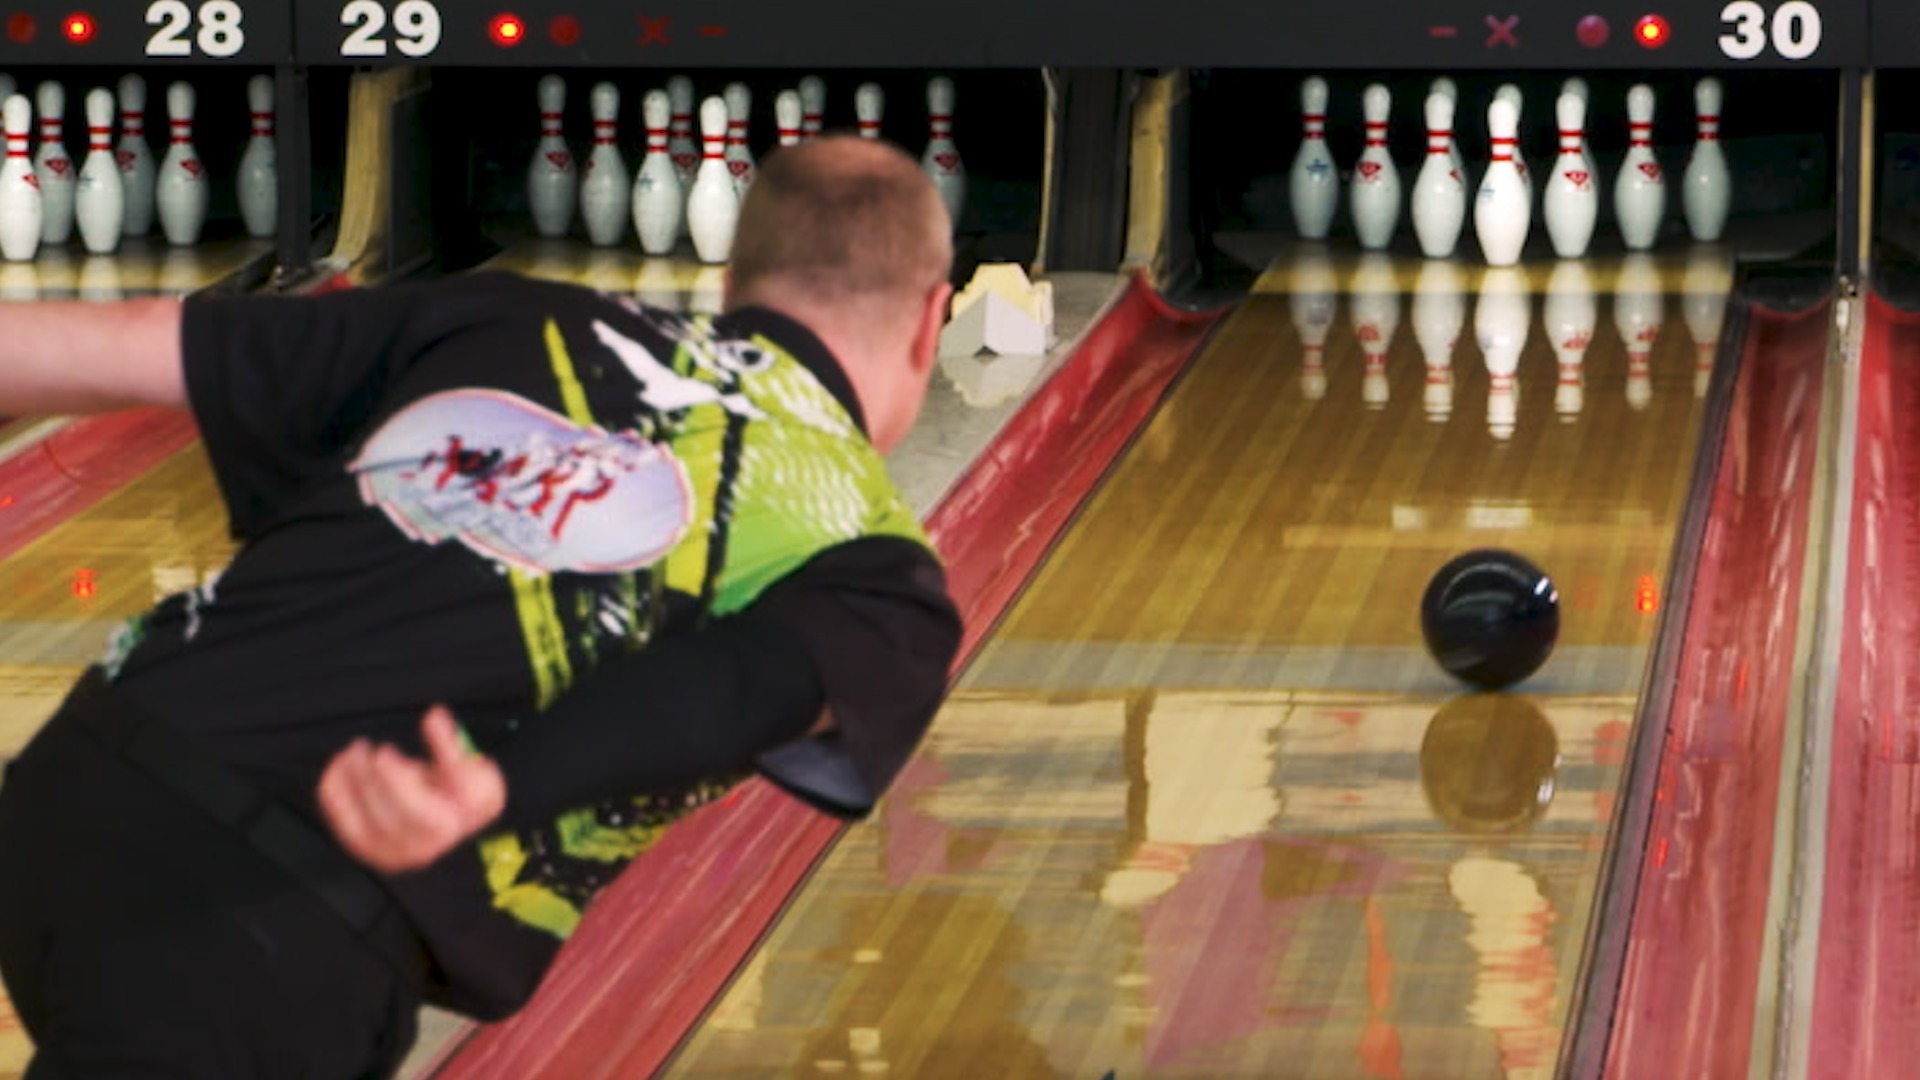 Two-Handed Bowling: Timing Tips